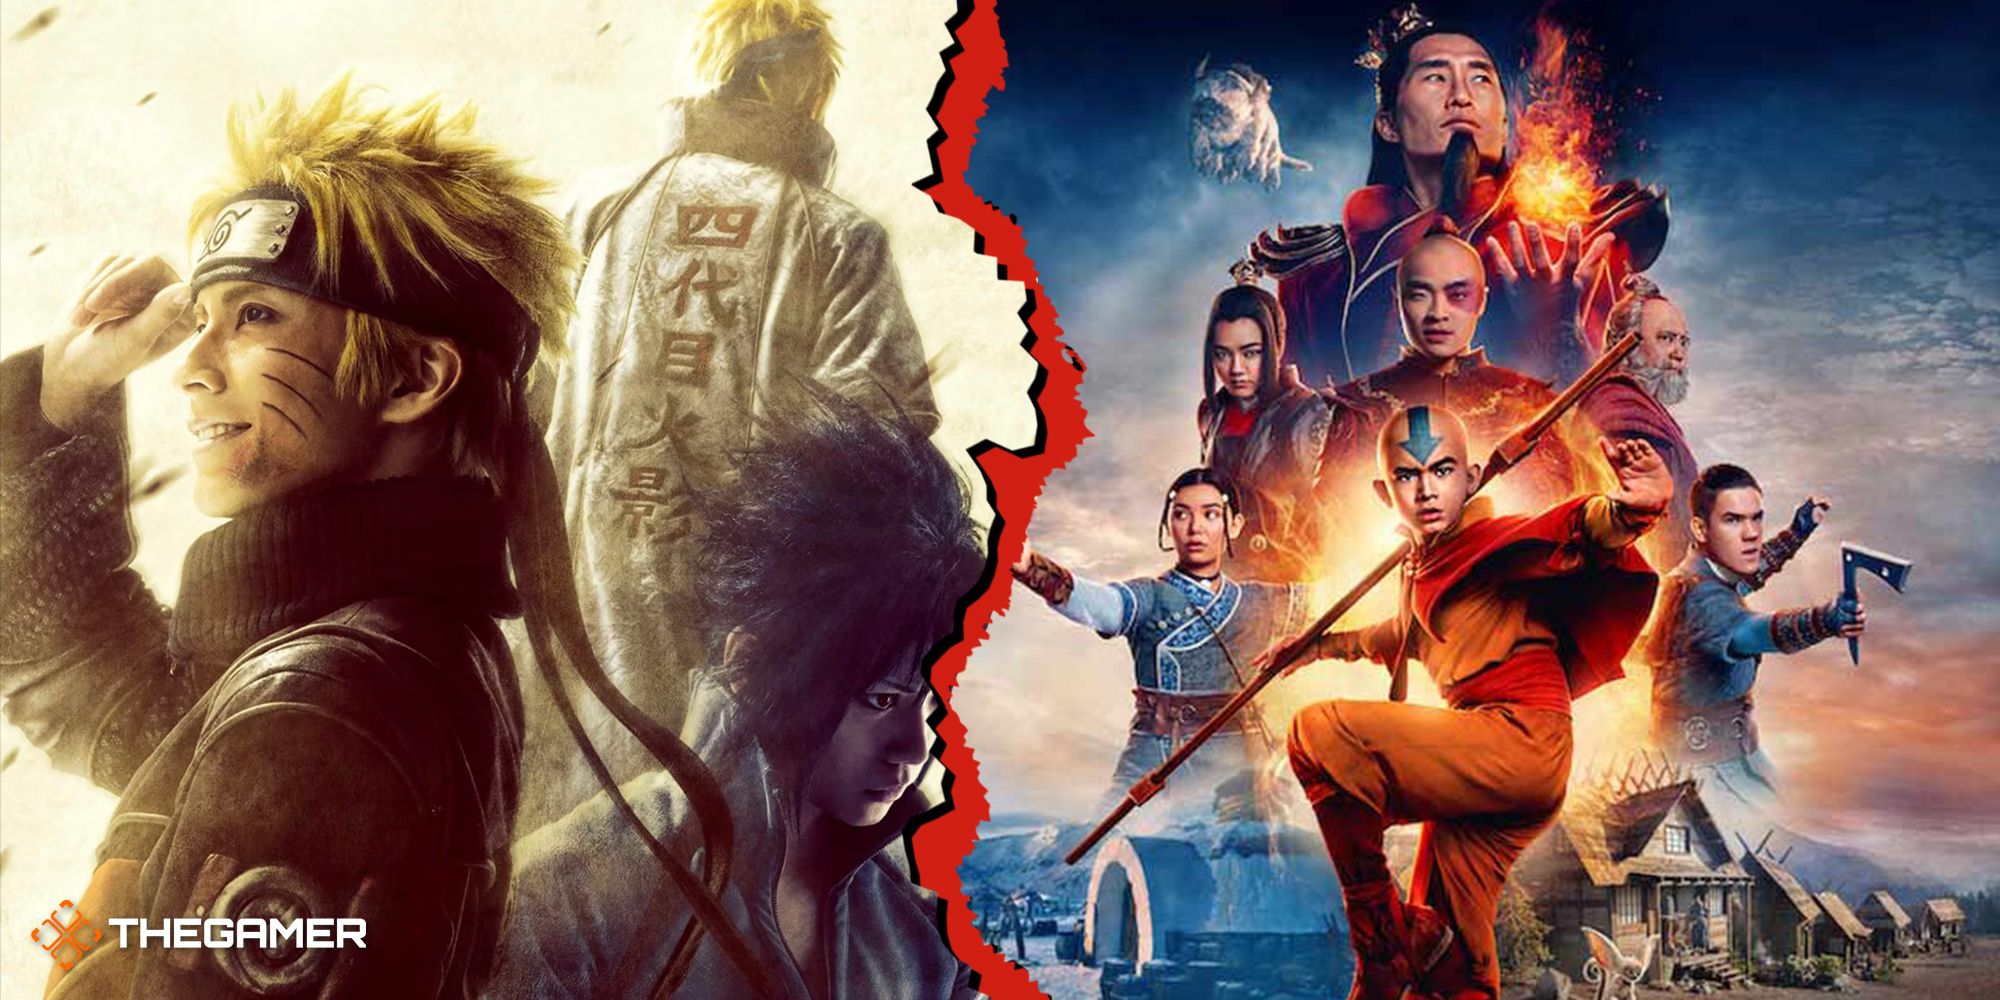 Art of a live-action Naruto on the left and the poster for Netflix's Avatar: The Last Airbender on the right, separated by a jagged red border